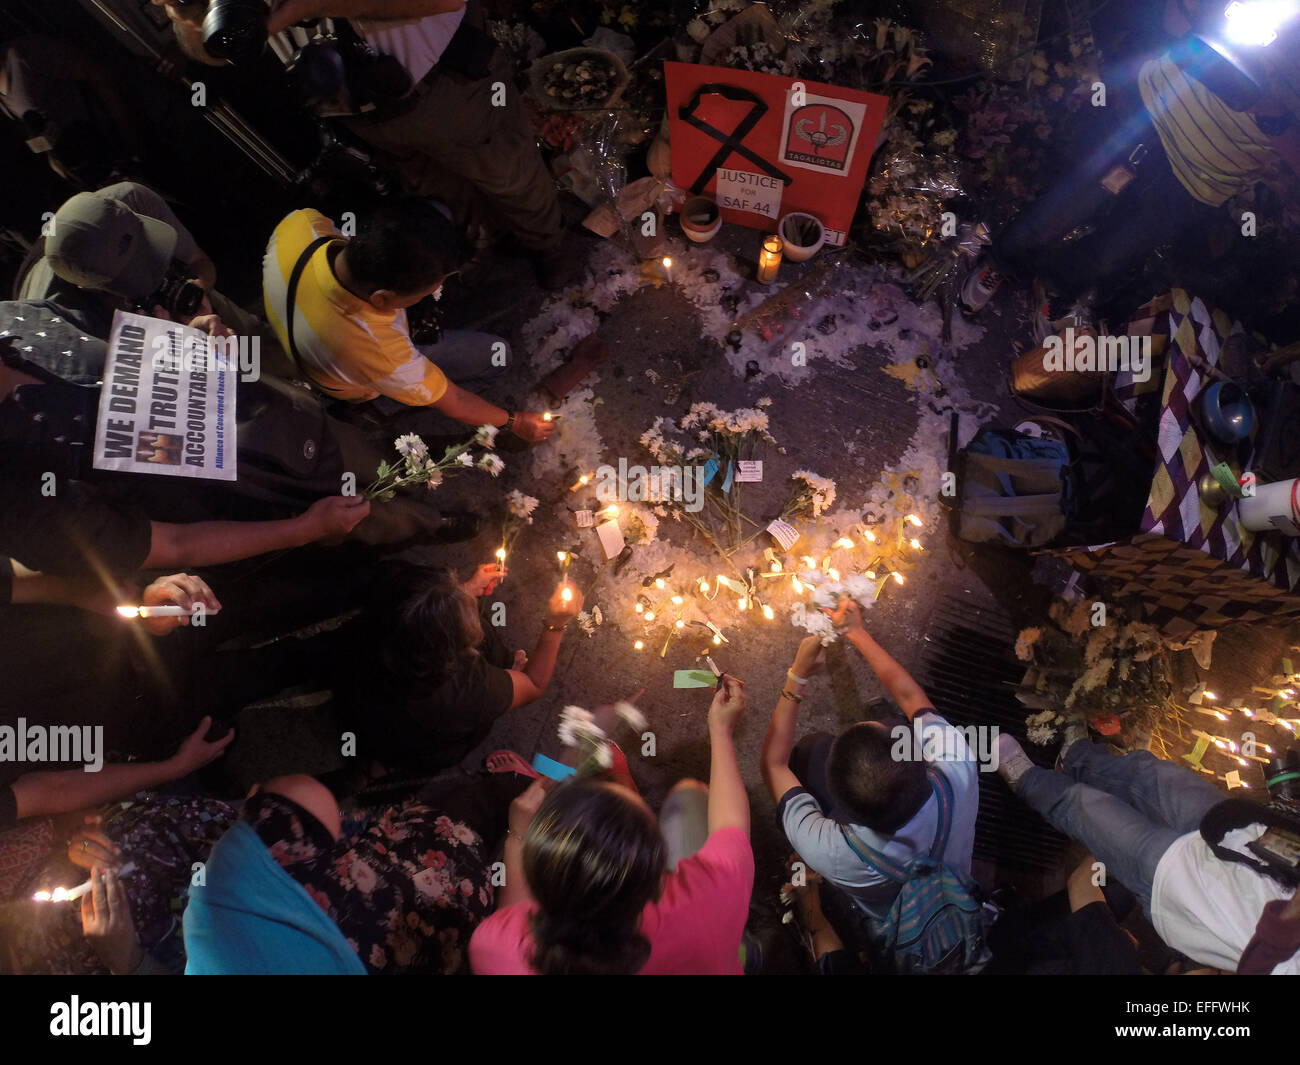 Quezon City, Philippines. 3rd Feb, 2015. People light candles and offer flowers and prayers for the slain 49 members of the Philippine National Police Special Action Force (PNP-SAF) at the gate of the PNP Headquarters in Quezon City, the Philippines, Feb. 3, 2015. There was lack of coordination and planning between the military forces and the leadership of the PNP-SAF during the violent clash in Mamasapano, Maguindanao on Jan. 25, chief of the Armed Forces of the Philippines said on Tuesday. © Rouelle Umali/Xinhua/Alamy Live News Stock Photo